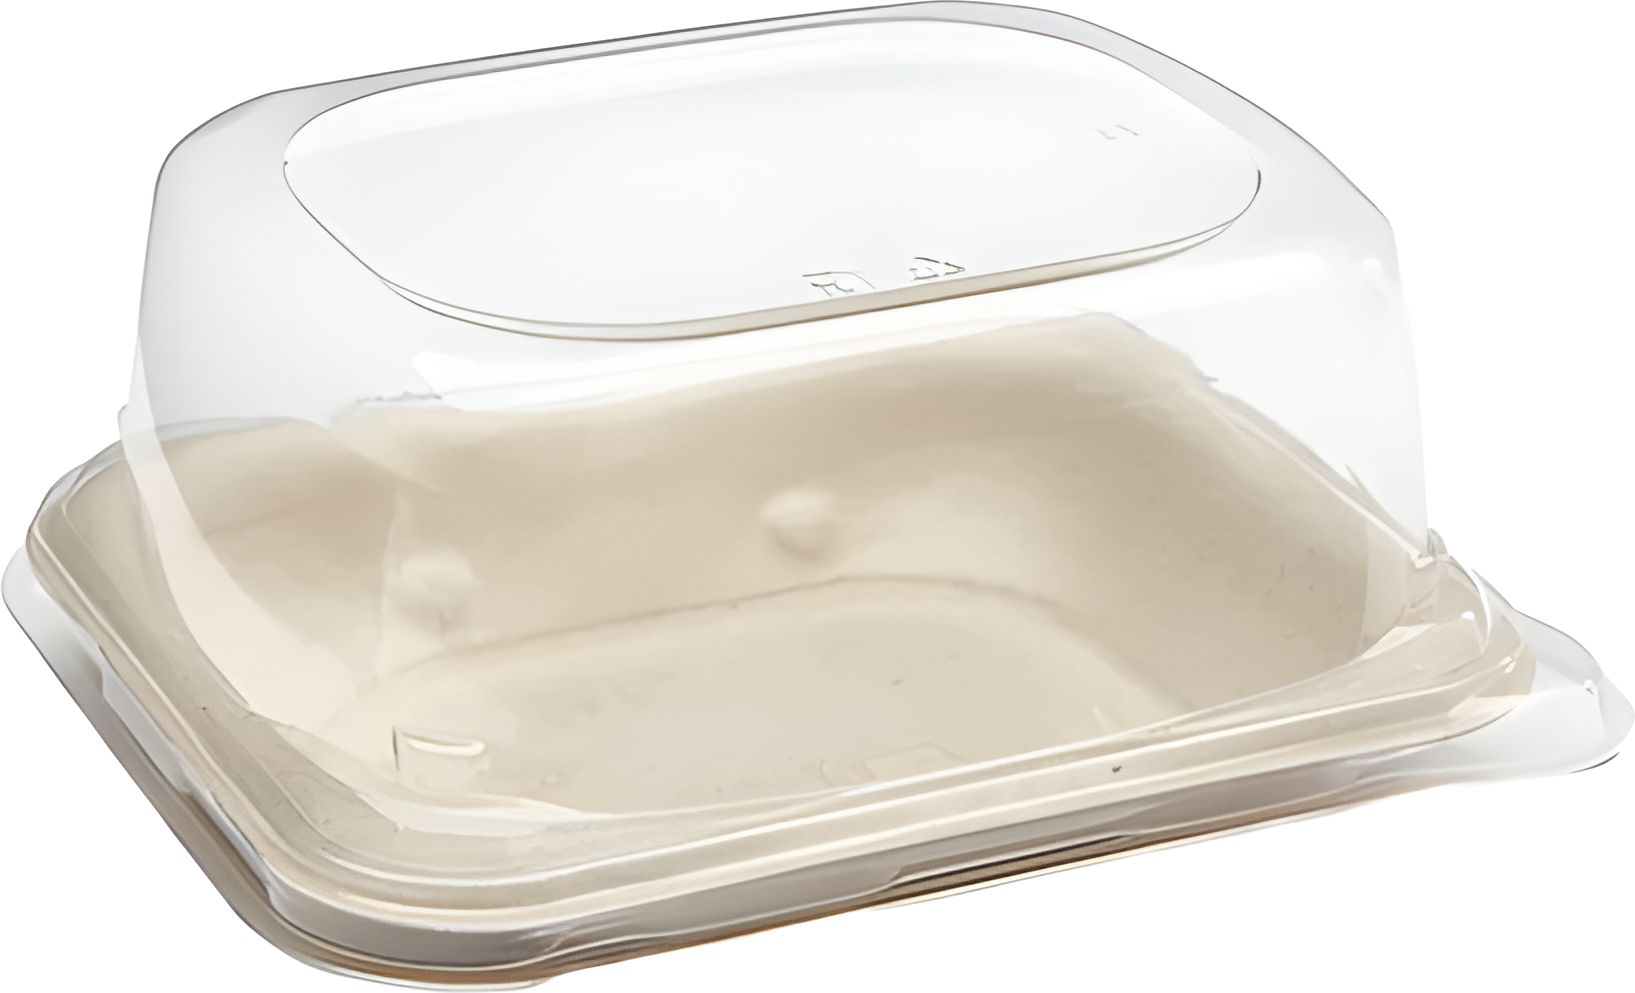 Sabert - Clear Lid for Pulp Sandwich Containers, 300/cs - 534555D